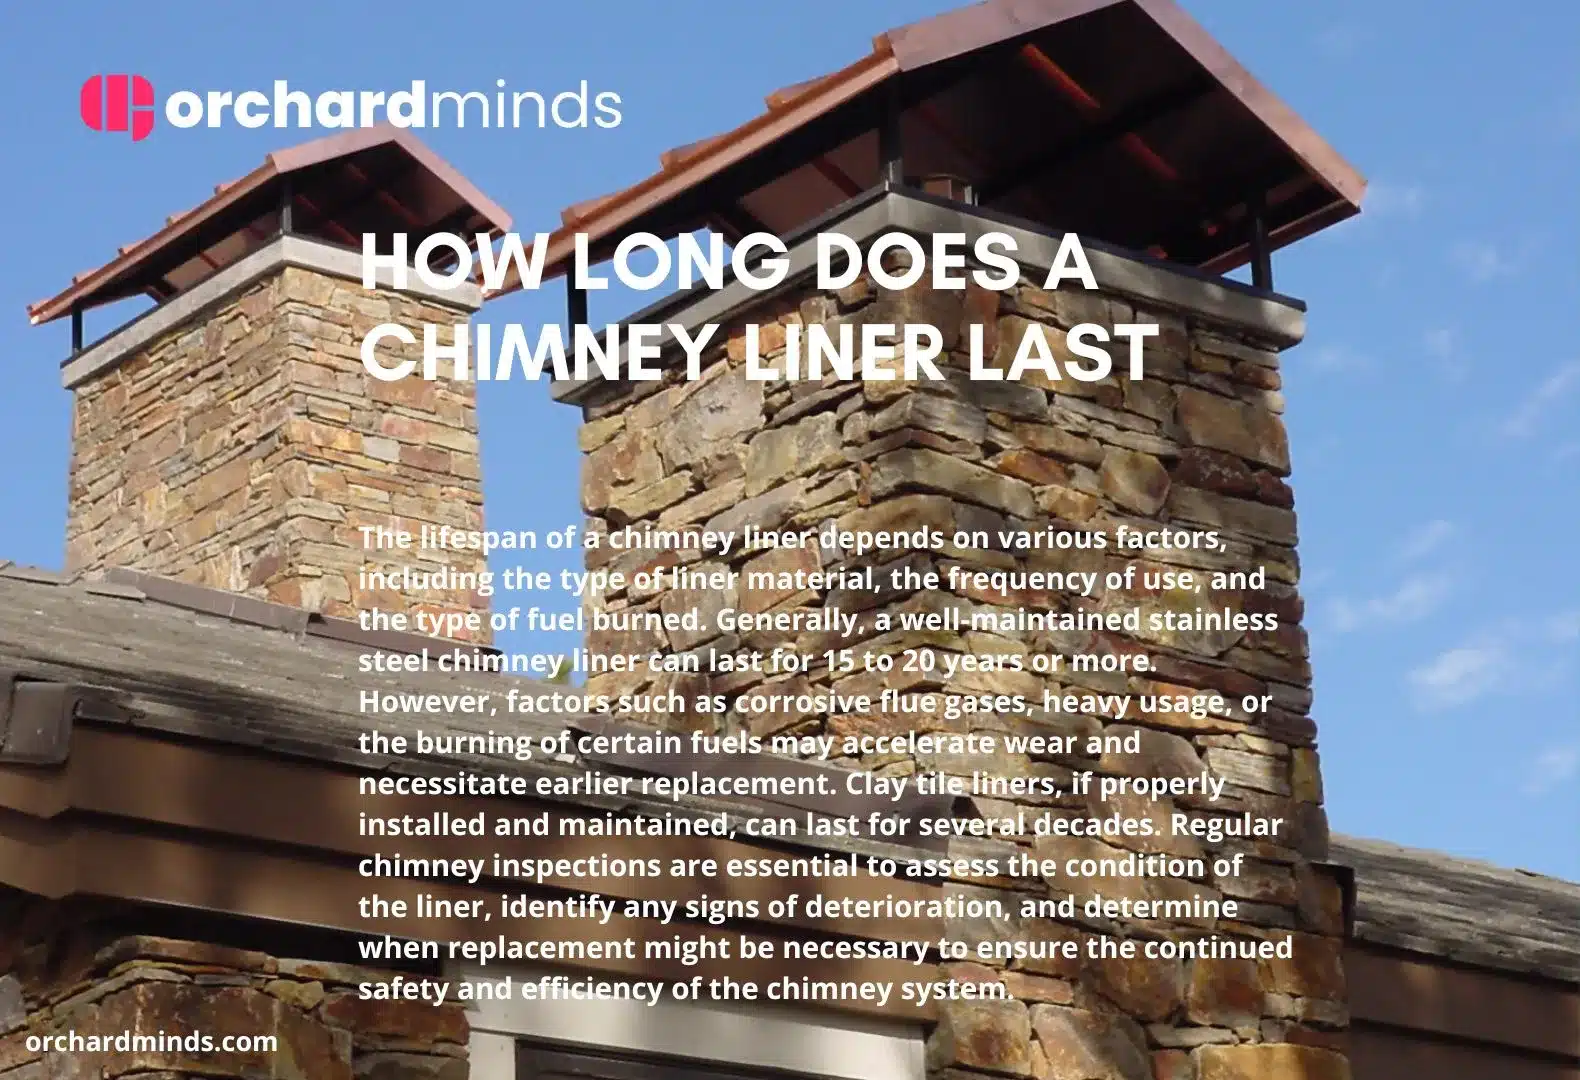 How long does a chimney liner last